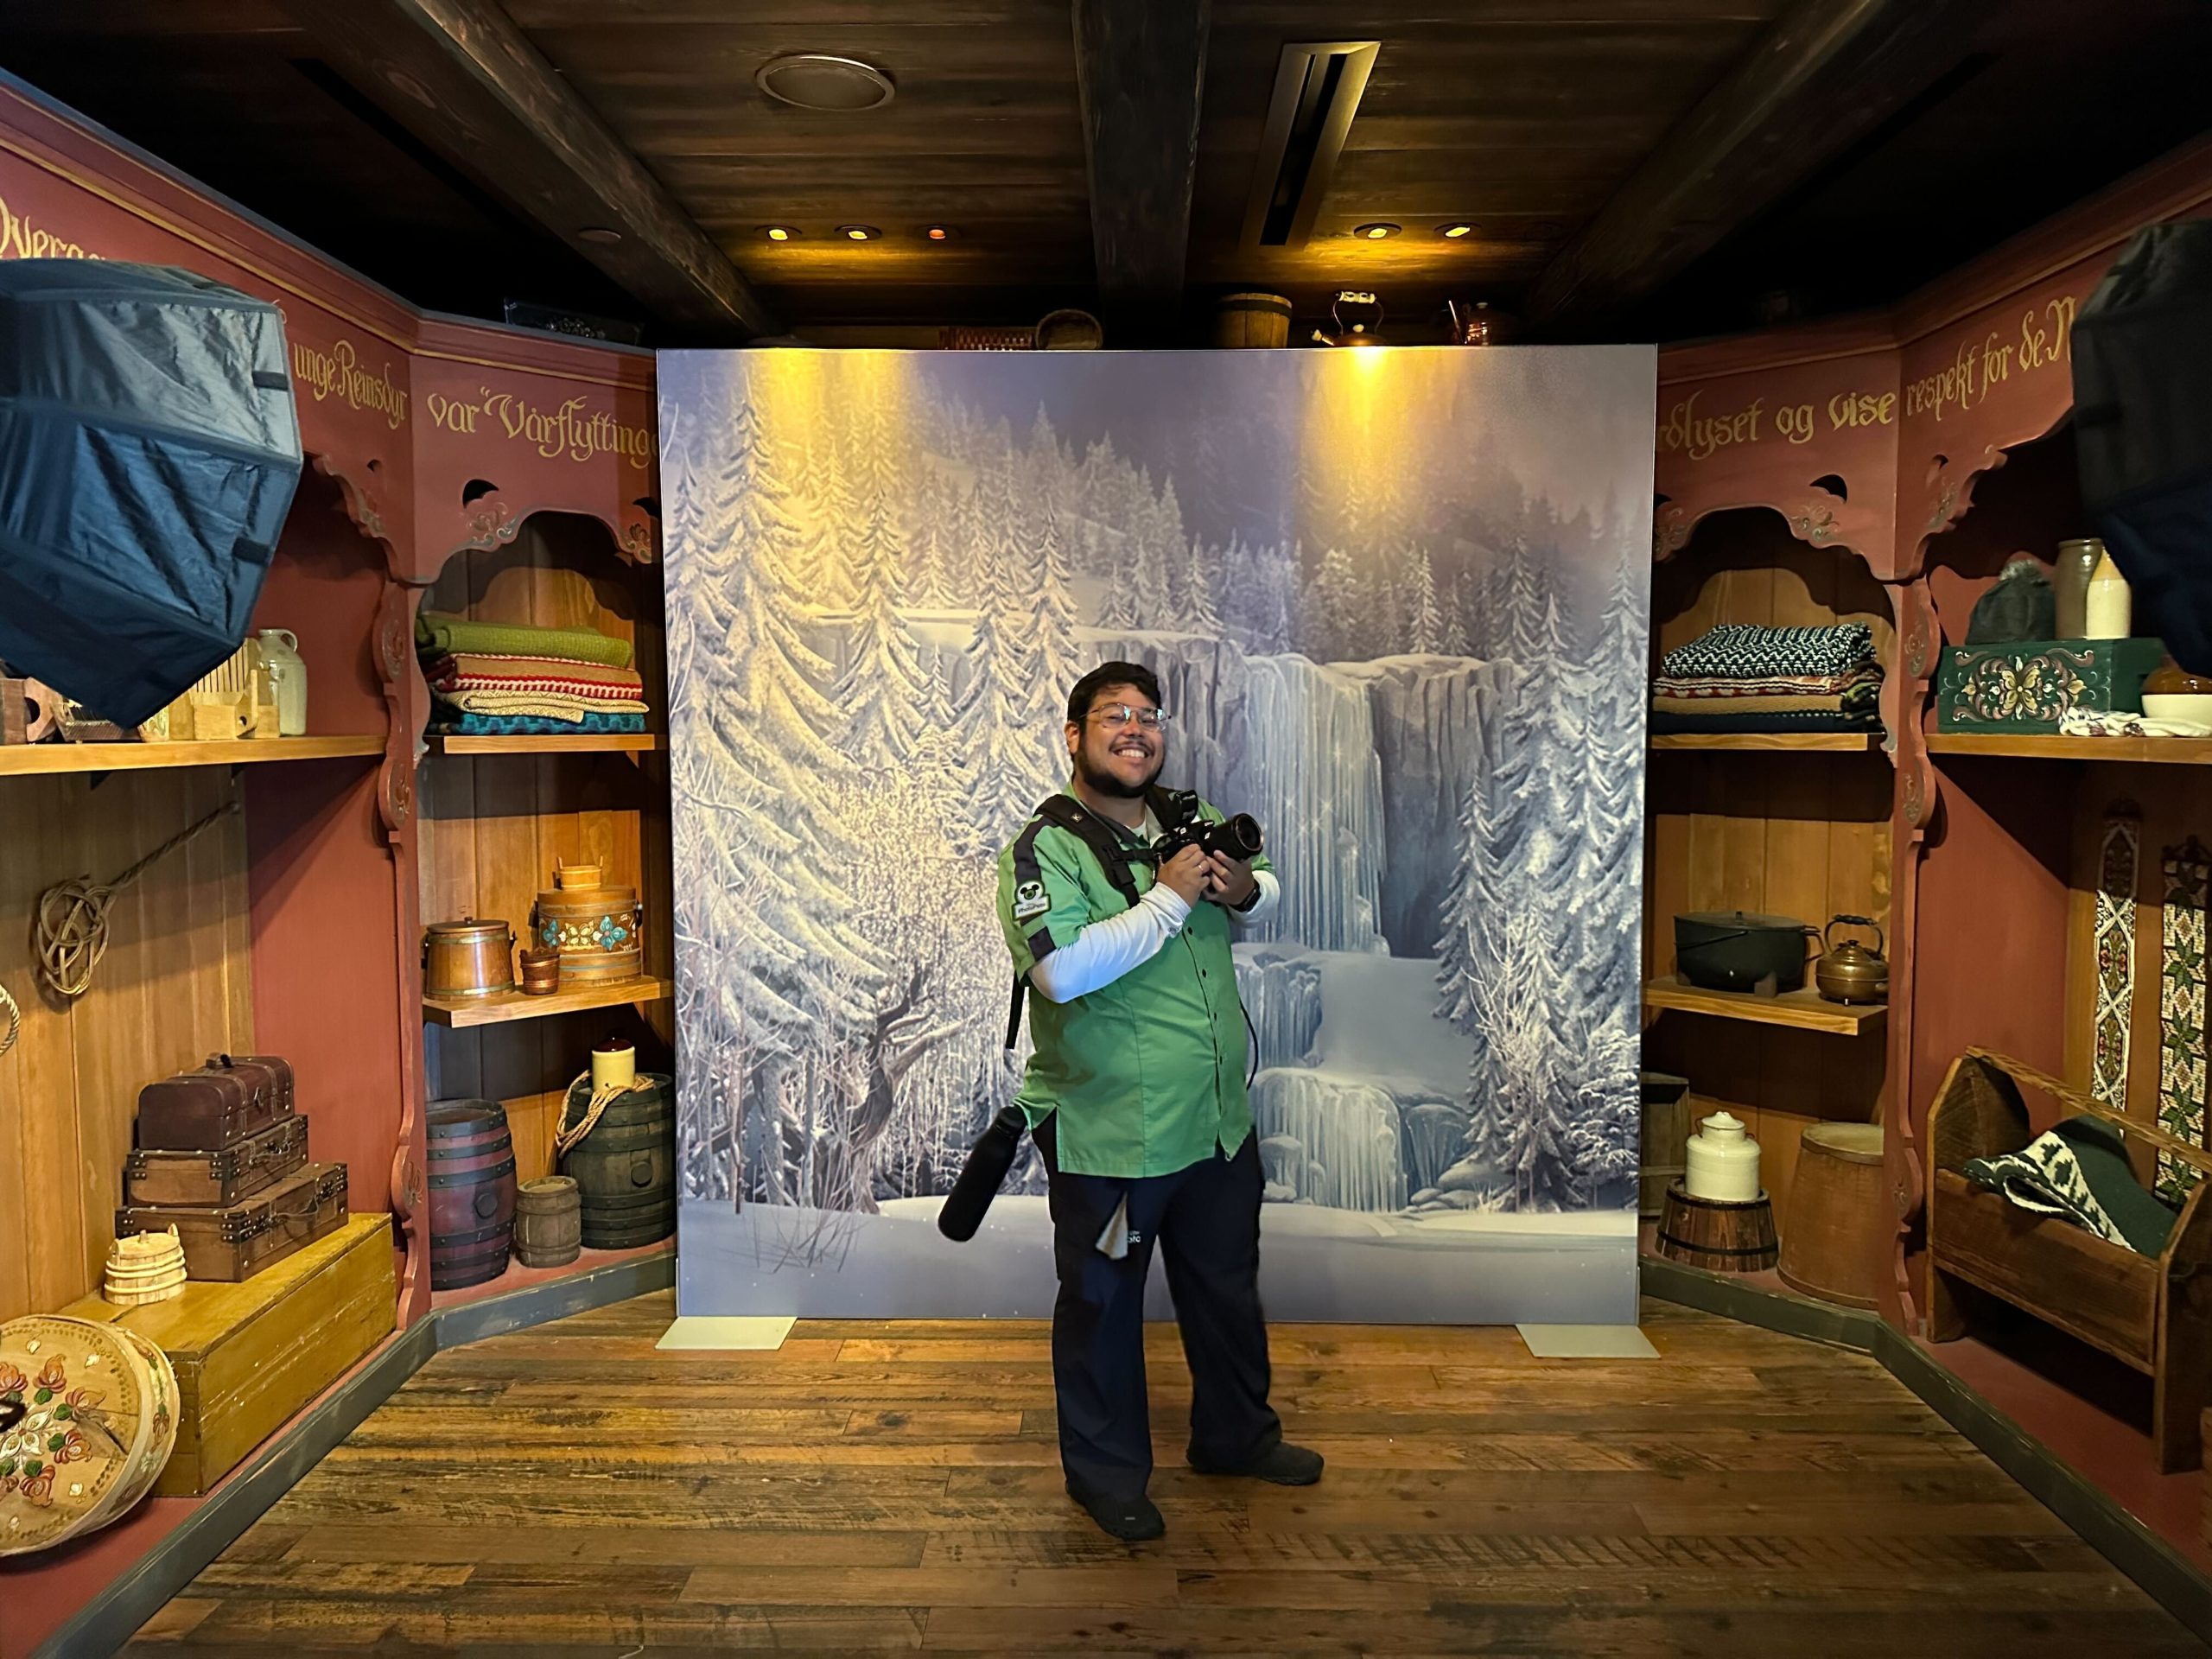 New photopass opportunity at the wandering reindeer at Norway pavilion